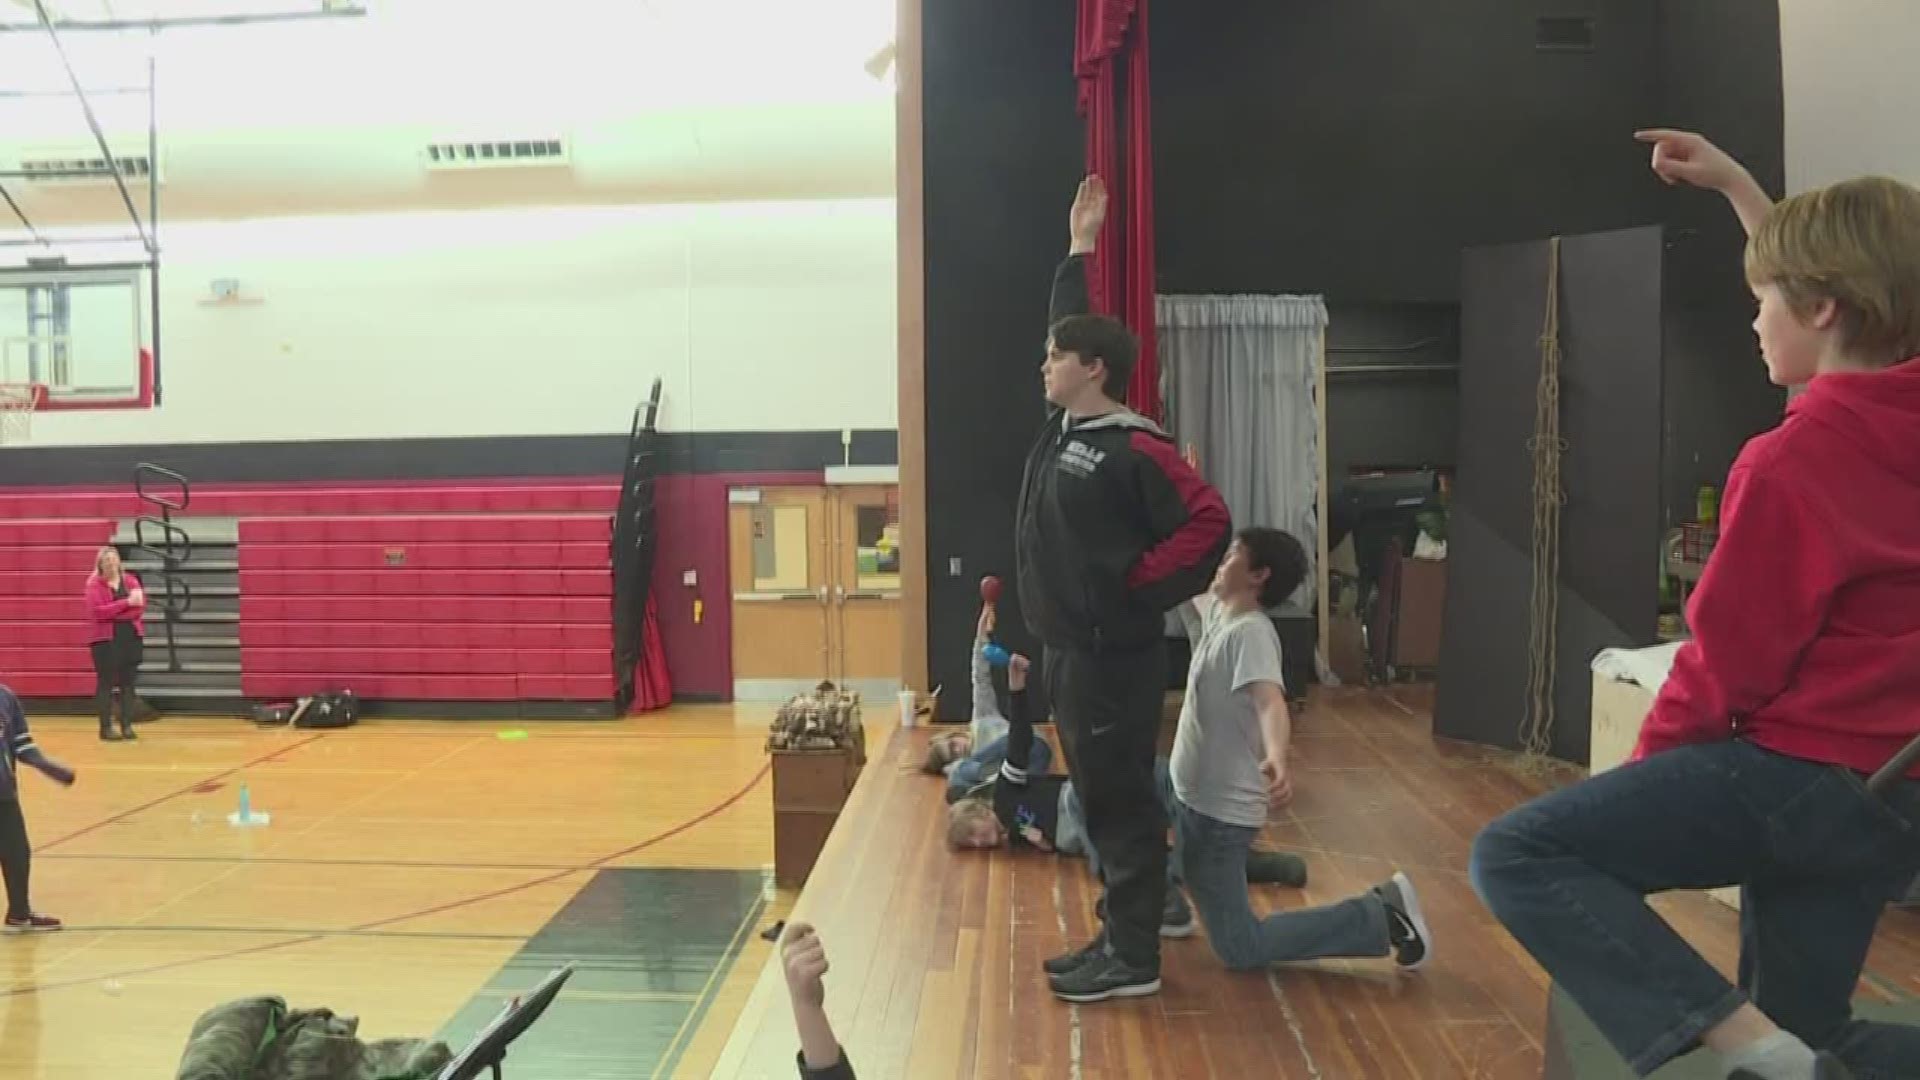 Feed ME: students at Wells Junior High are putting on a production of Peter Pan and asking that those who attend bring a food donation.